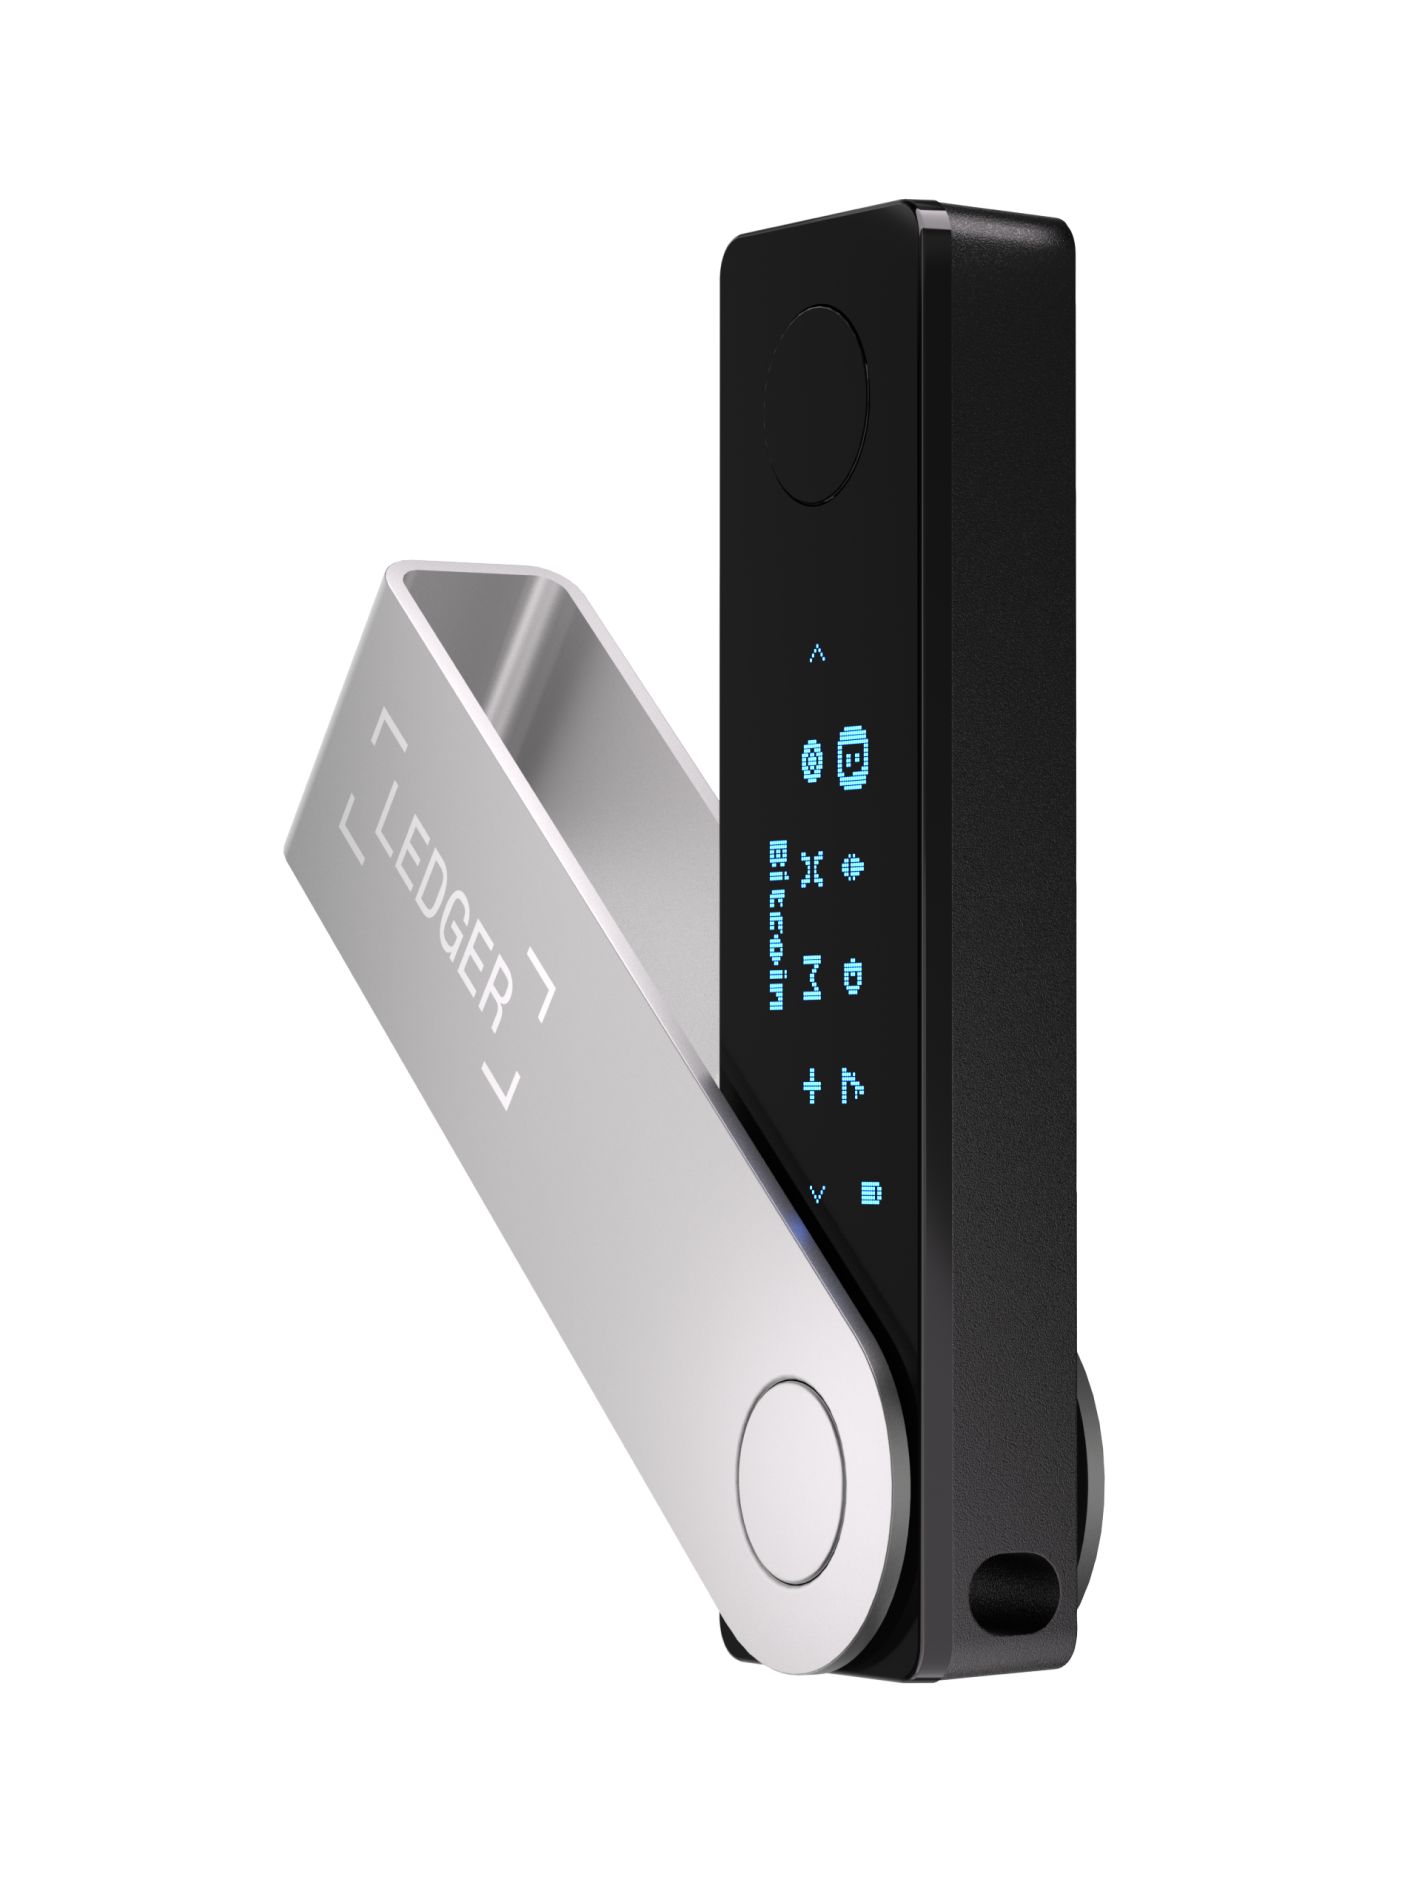 Buy Ledger Stax Crypto Hardware Wallet online in UAE - bitcoinhelp.fun UAE